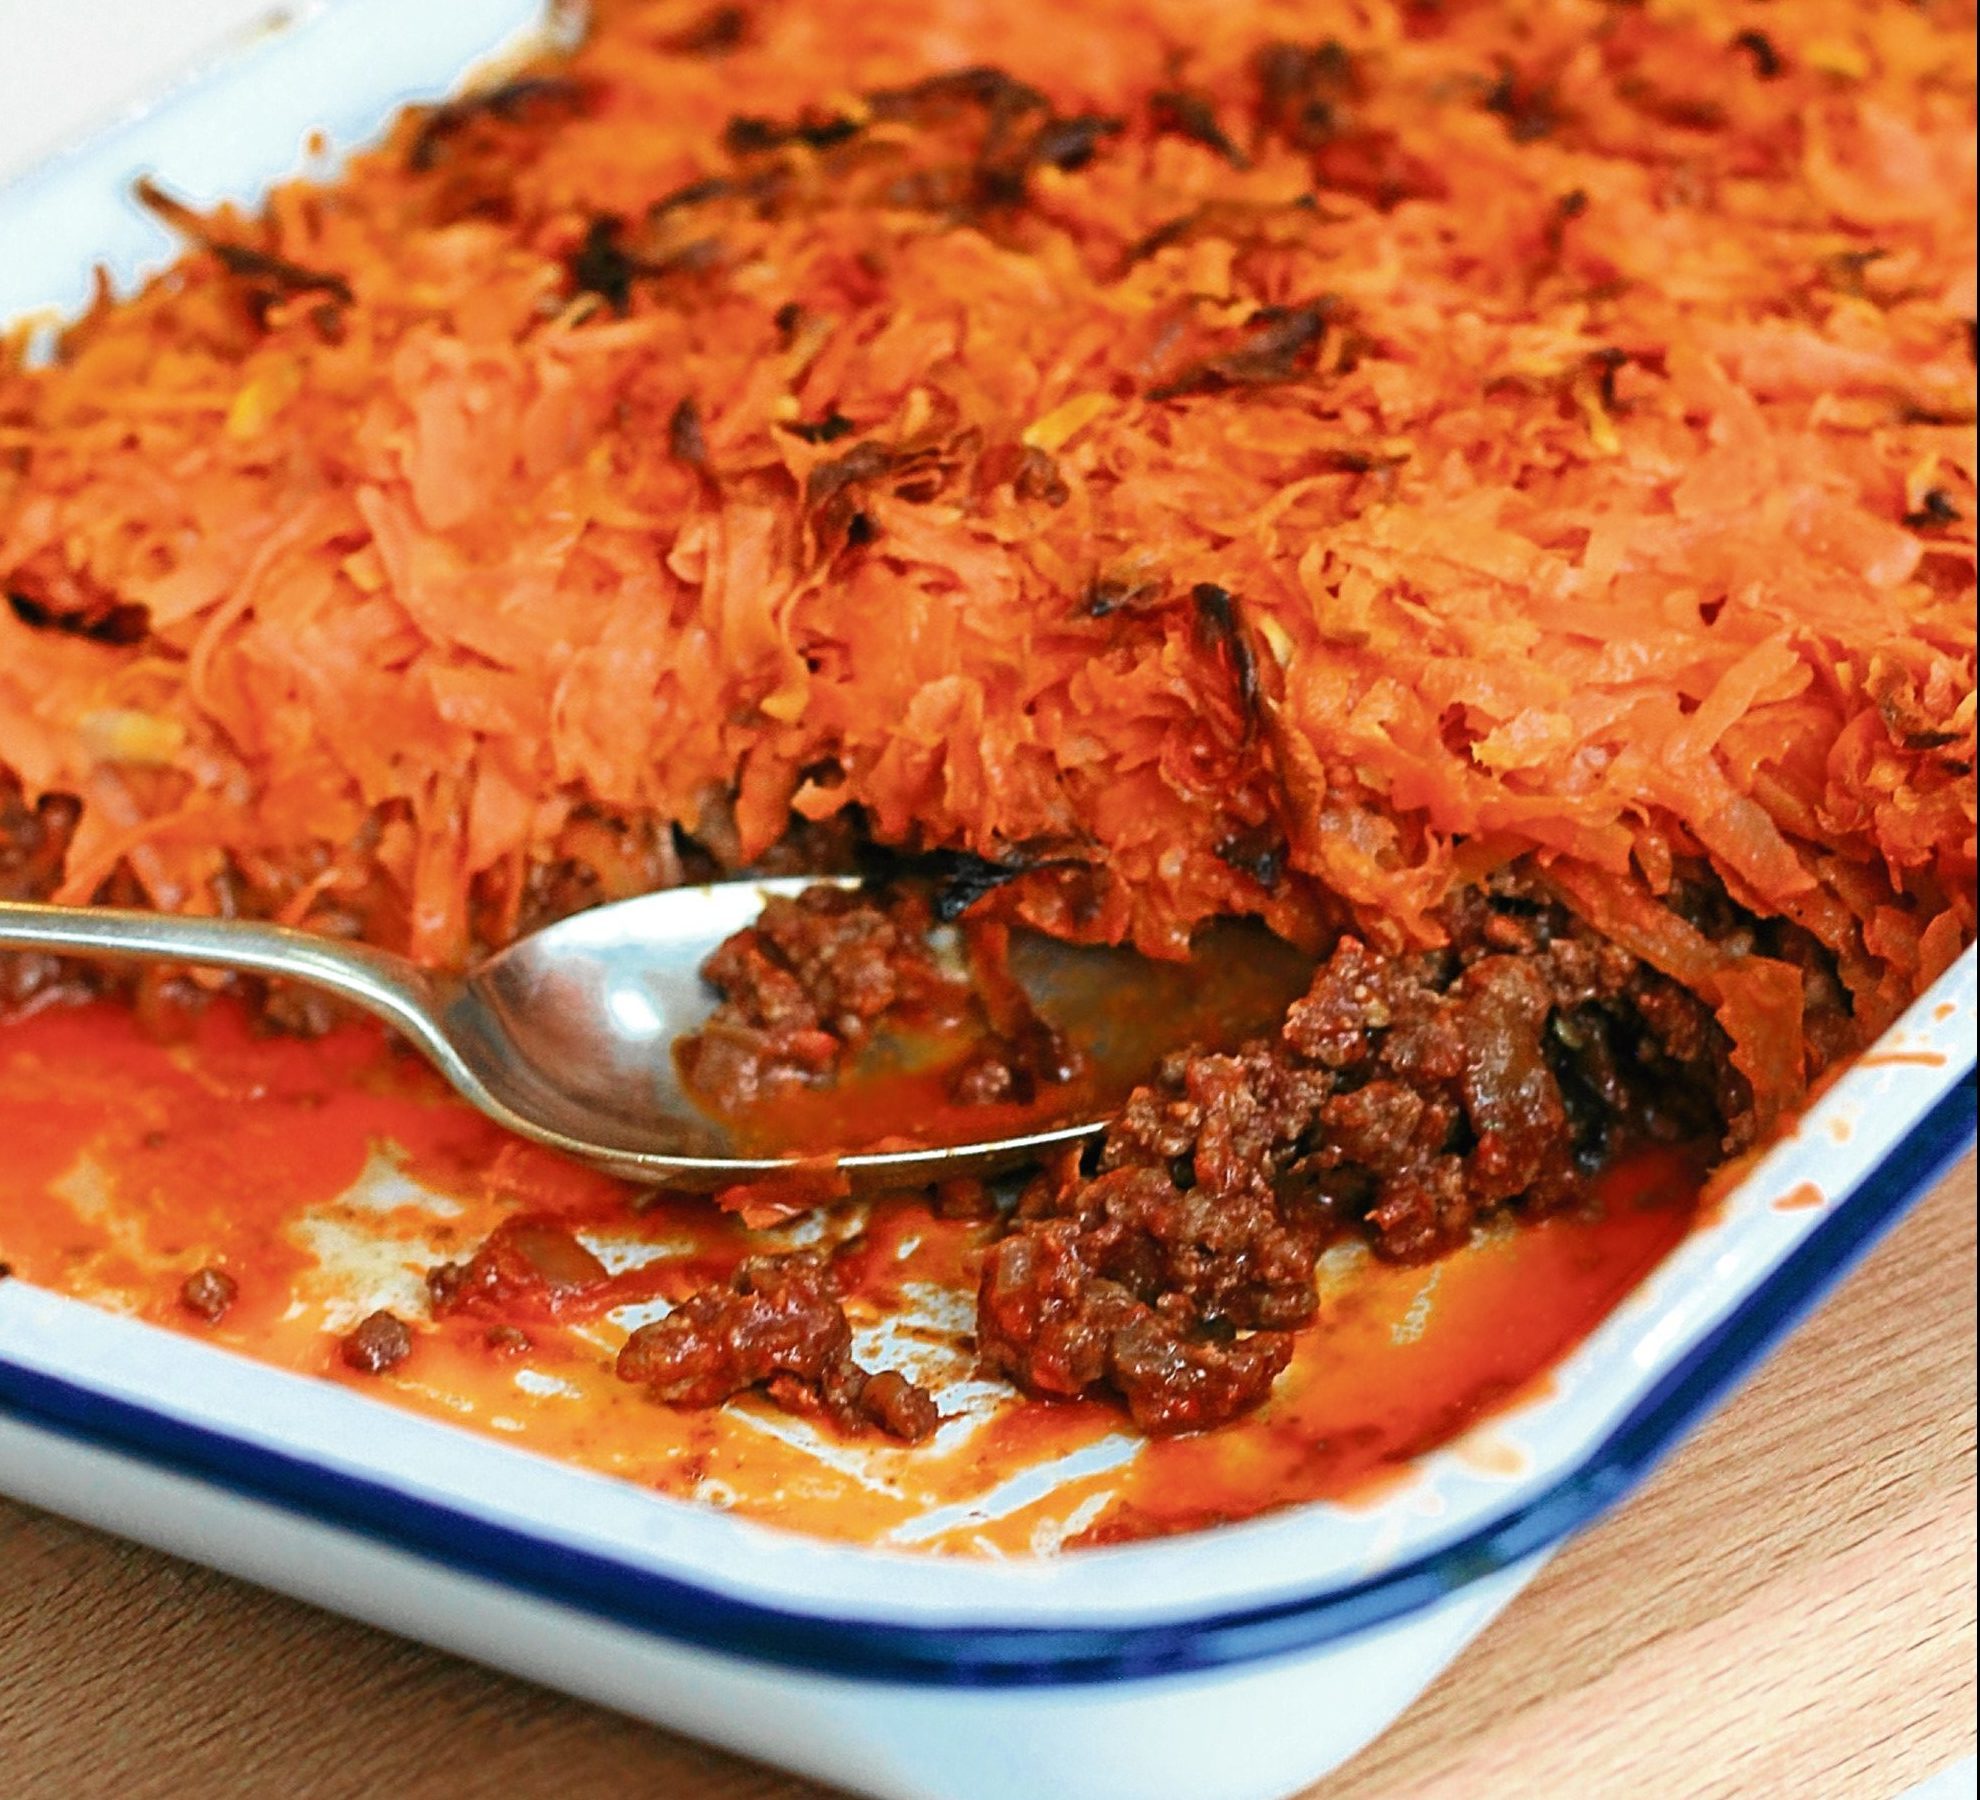 Beef mince with sweet potato and butternut squash hash brown